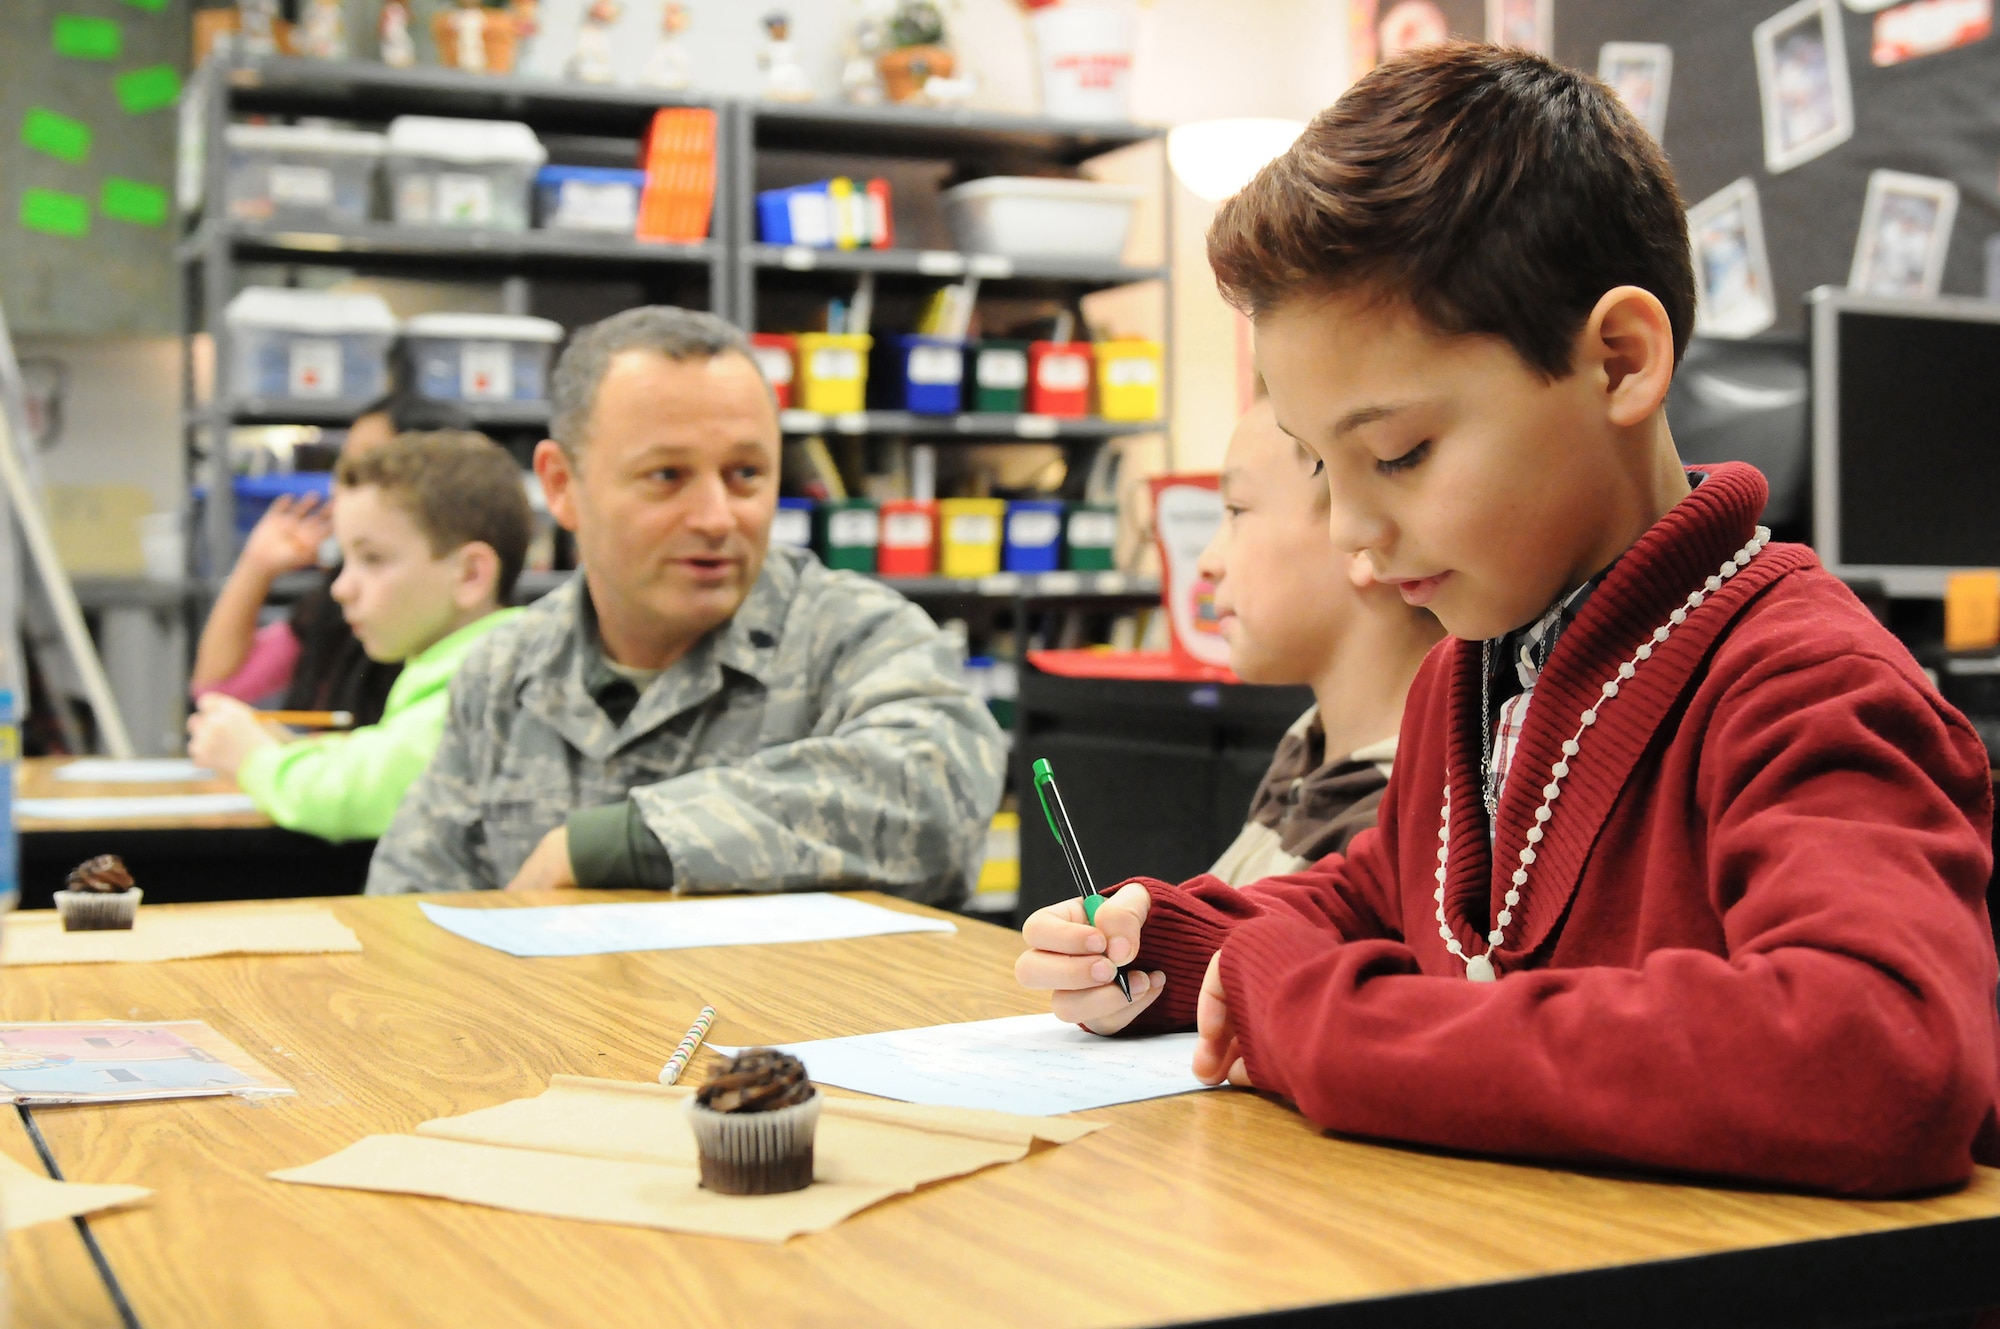 Austin Gozalez, a fourth-grade student at Clear Creek Elementary School in Shelbyville, Ky., writes a letter to Staff Sgt. Krome Raymond, a Kentucky Air National Guardsman who is deployed to Afghanistan, as Raymond's supervisor, Lt. Col. Armand Bolotte, looks on during a classroom visit Jan. 9, 2014. Gonzalez and his classmates have “adopted” members of the Louisville-based 123rd Airlift Wing for the duration of their deployments, sending them letters and snacks. (U.S. Air National Guard photo by Staff Sgt. Vicky Spesard)